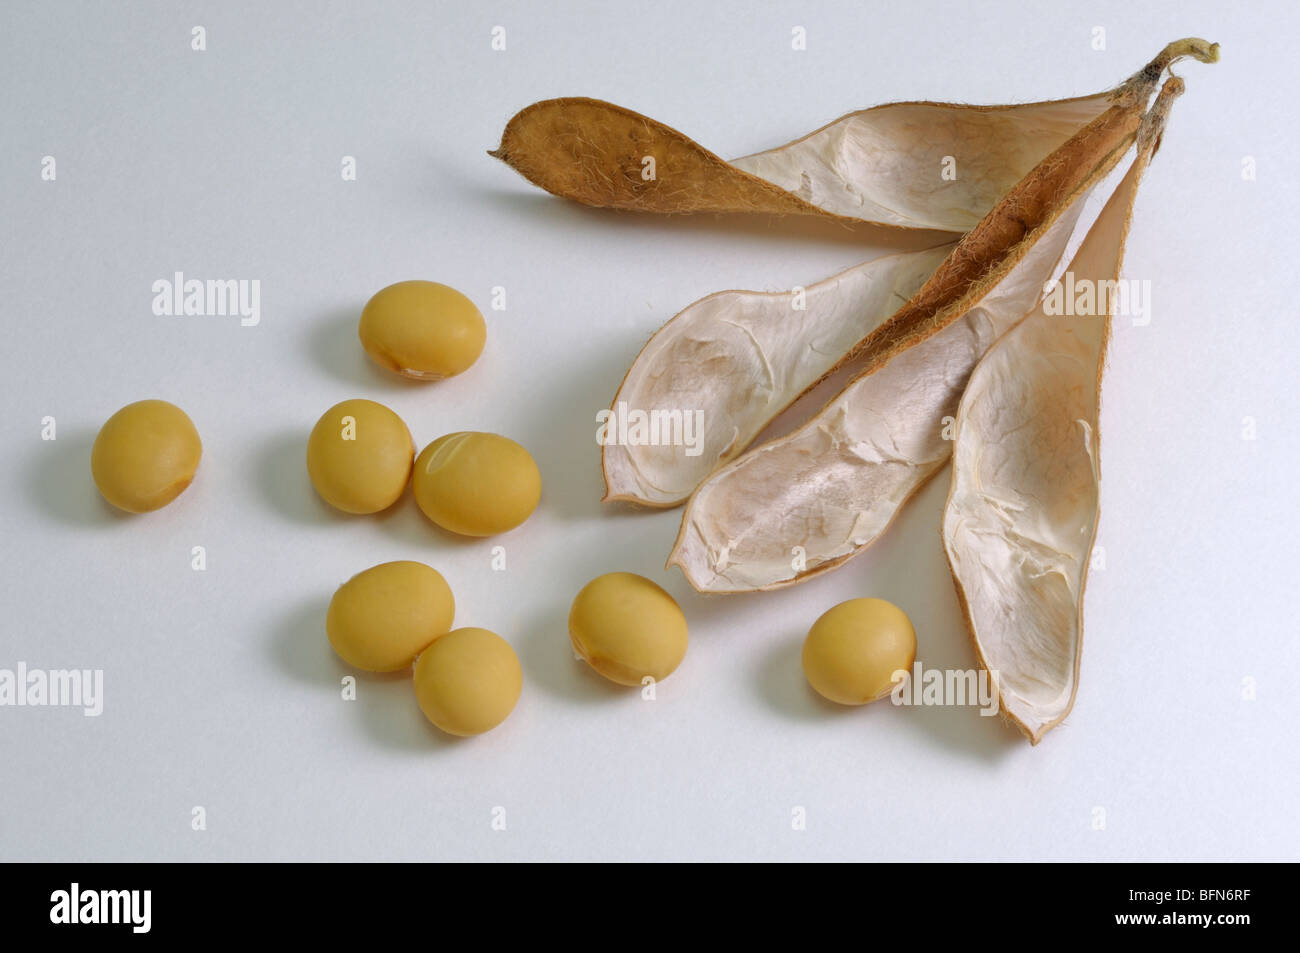 Soya Bean, Soybean (Glycine max). Ripe pods and beans, studio picture. Stock Photo